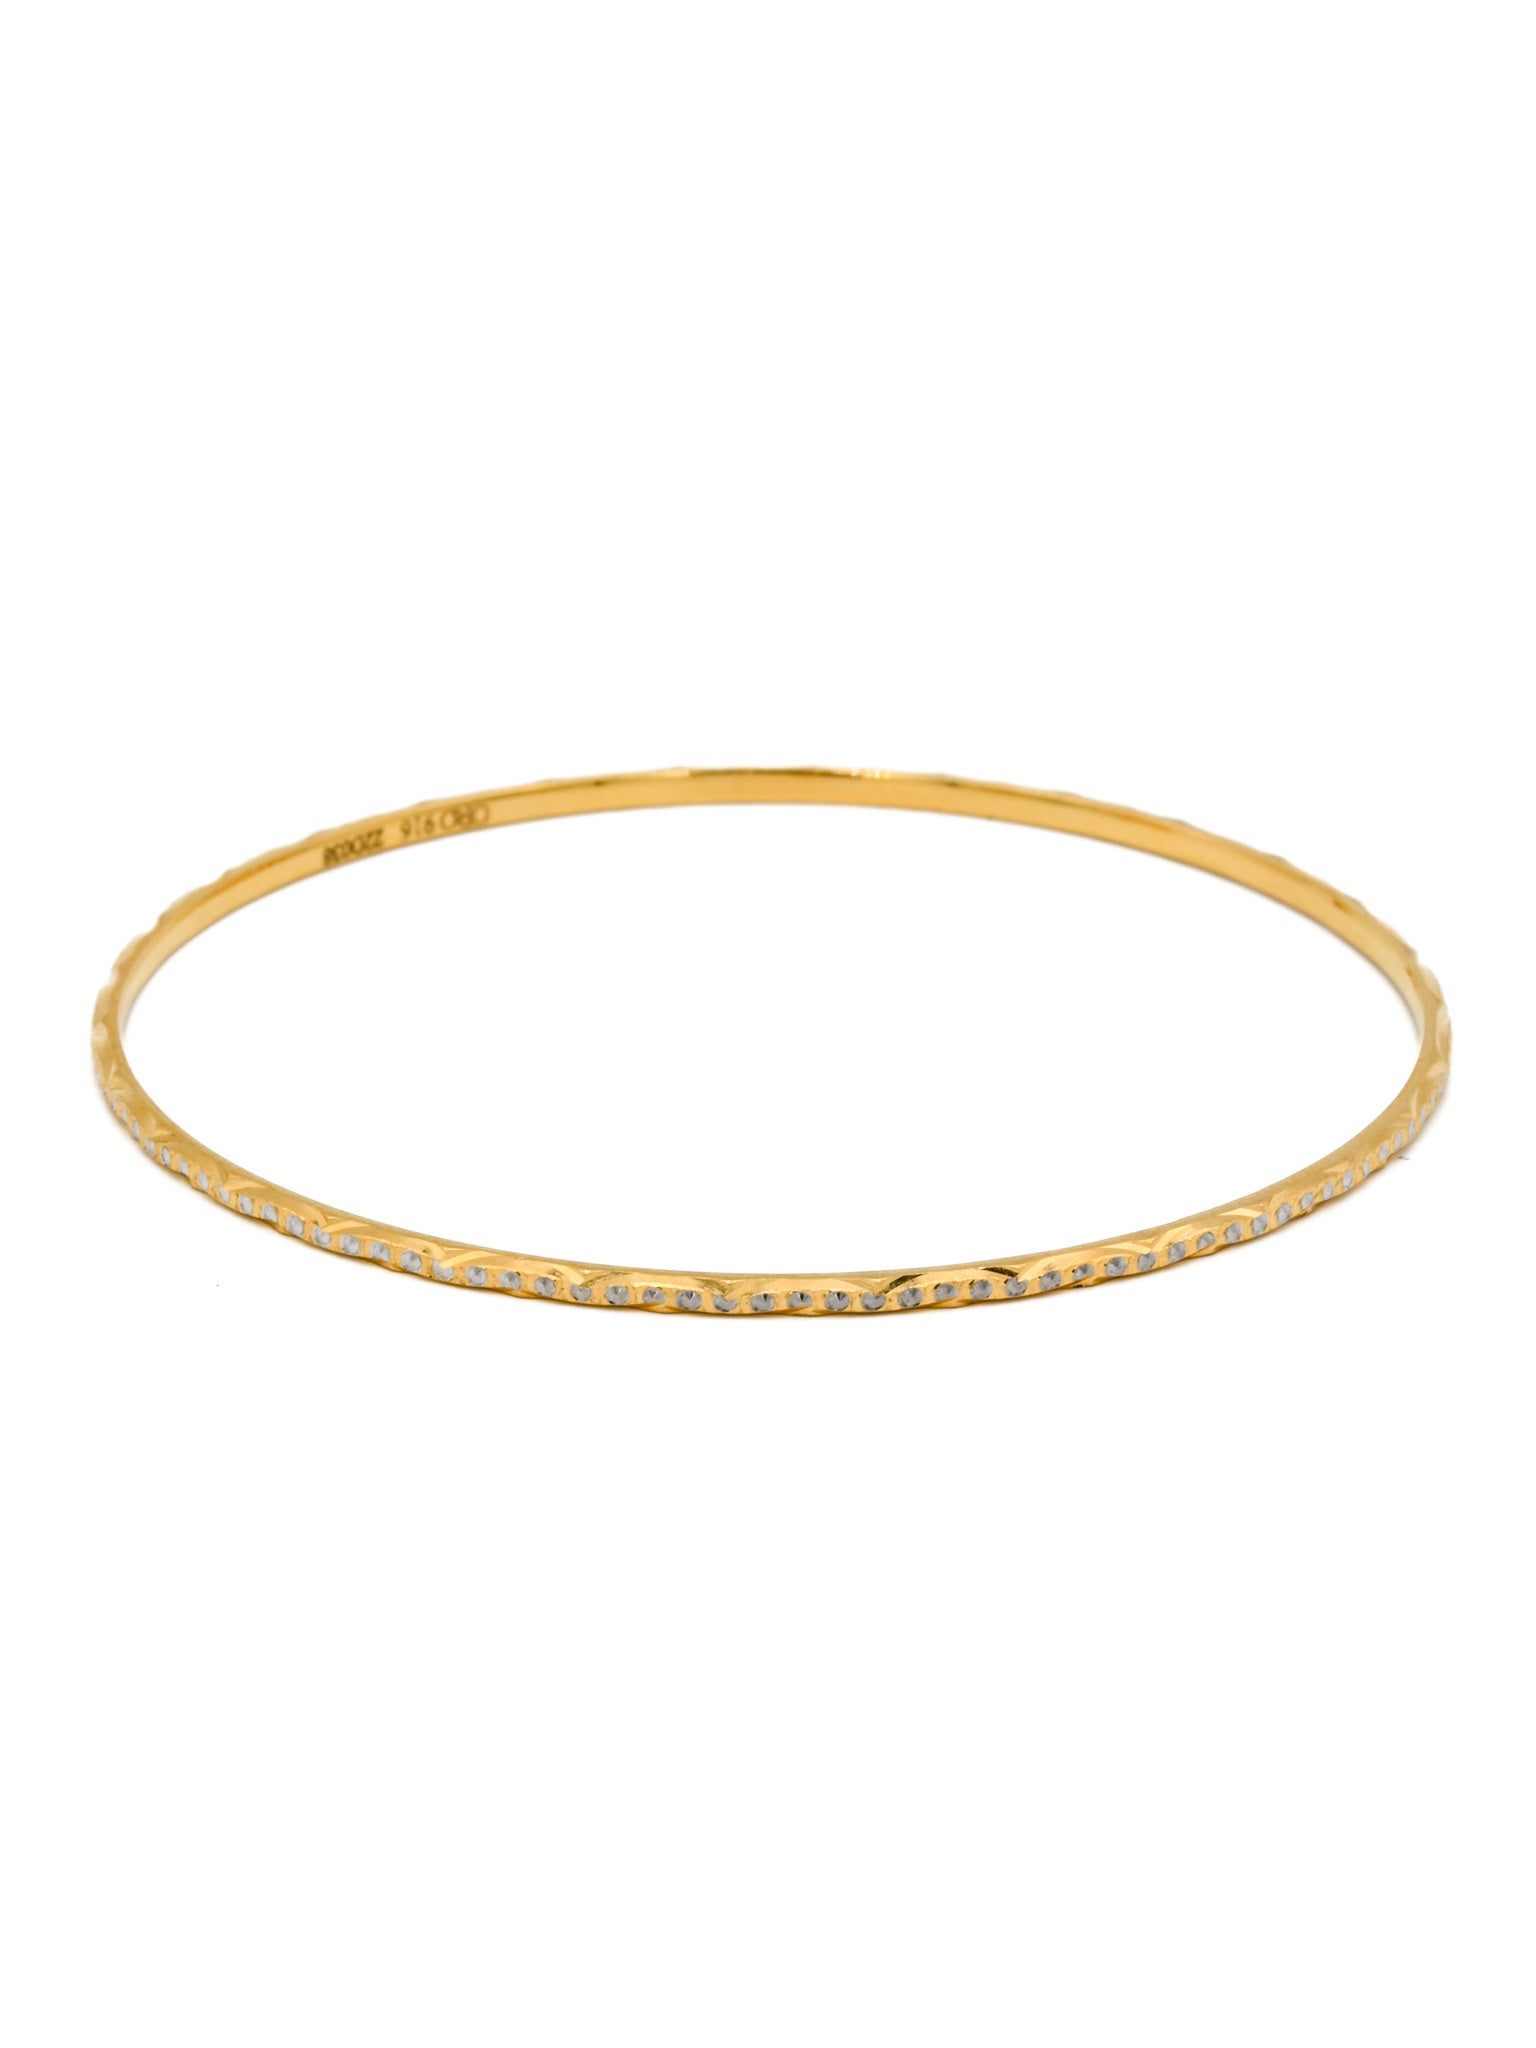 22ct Gold Two Tone 4 Bangles - Roop Darshan